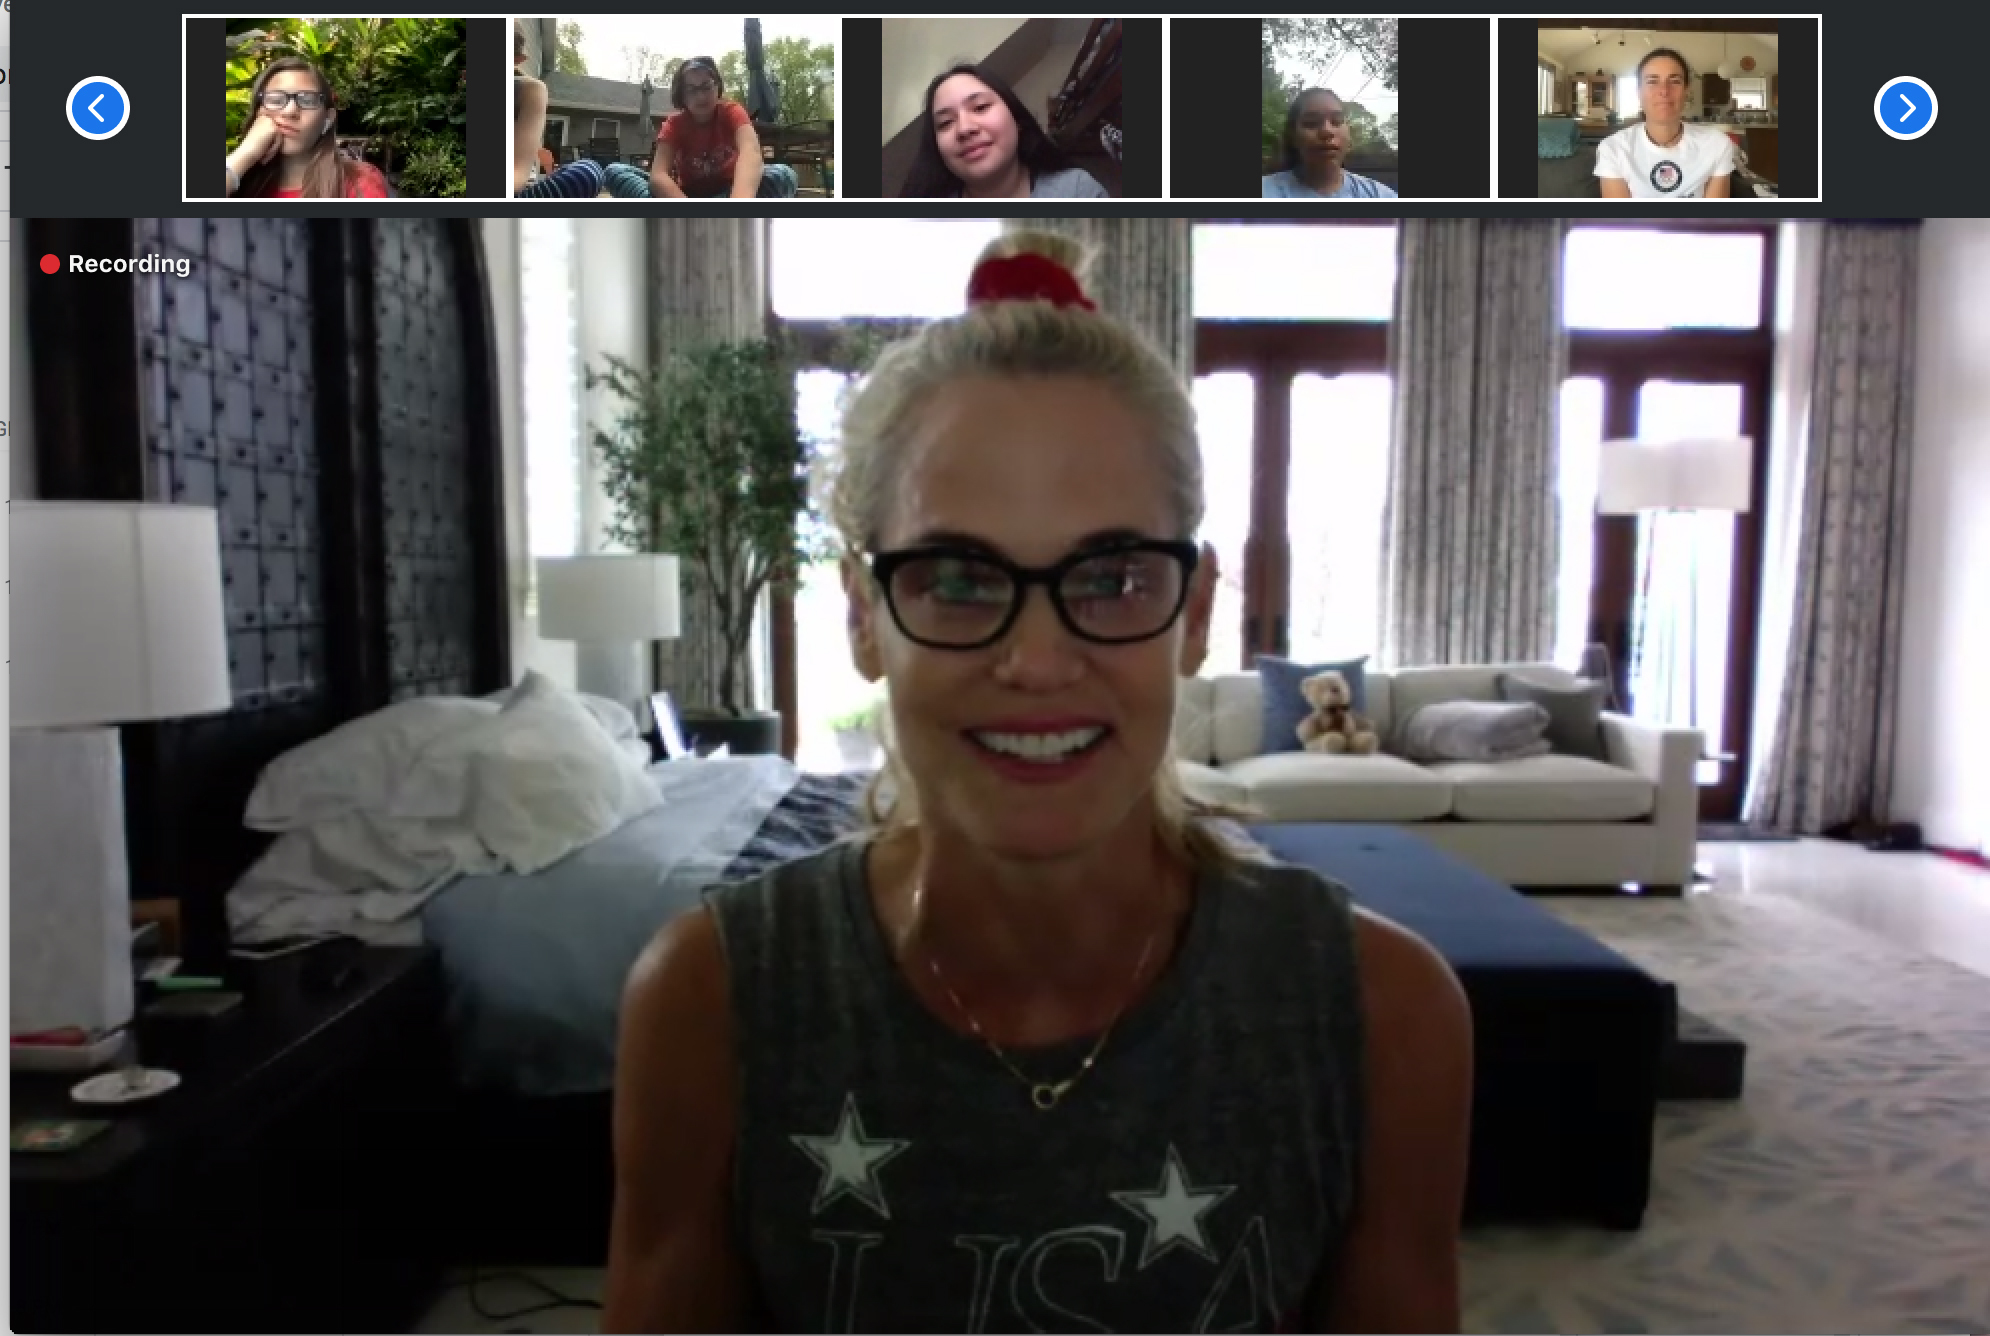 Olympian Dara Torres attends an i-tri meeting via Zoom on Saturday to encourage the participants in this year's virtual triathathon.